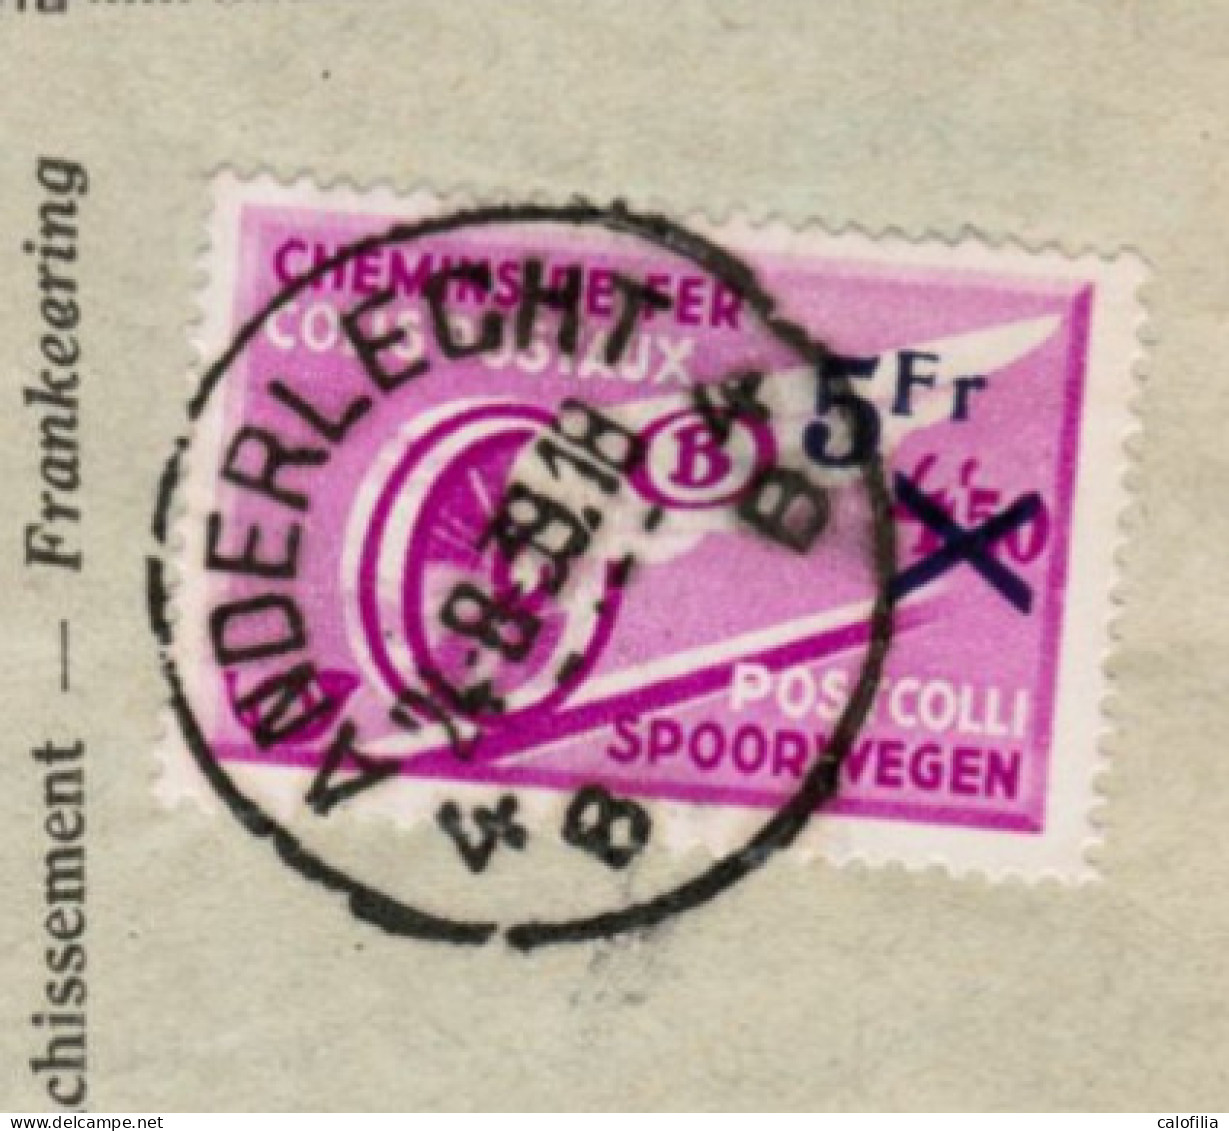 Fragment Bulletin D'expedition, Obliterations Centrale Nettes, ANDERLECHT 4 - Used